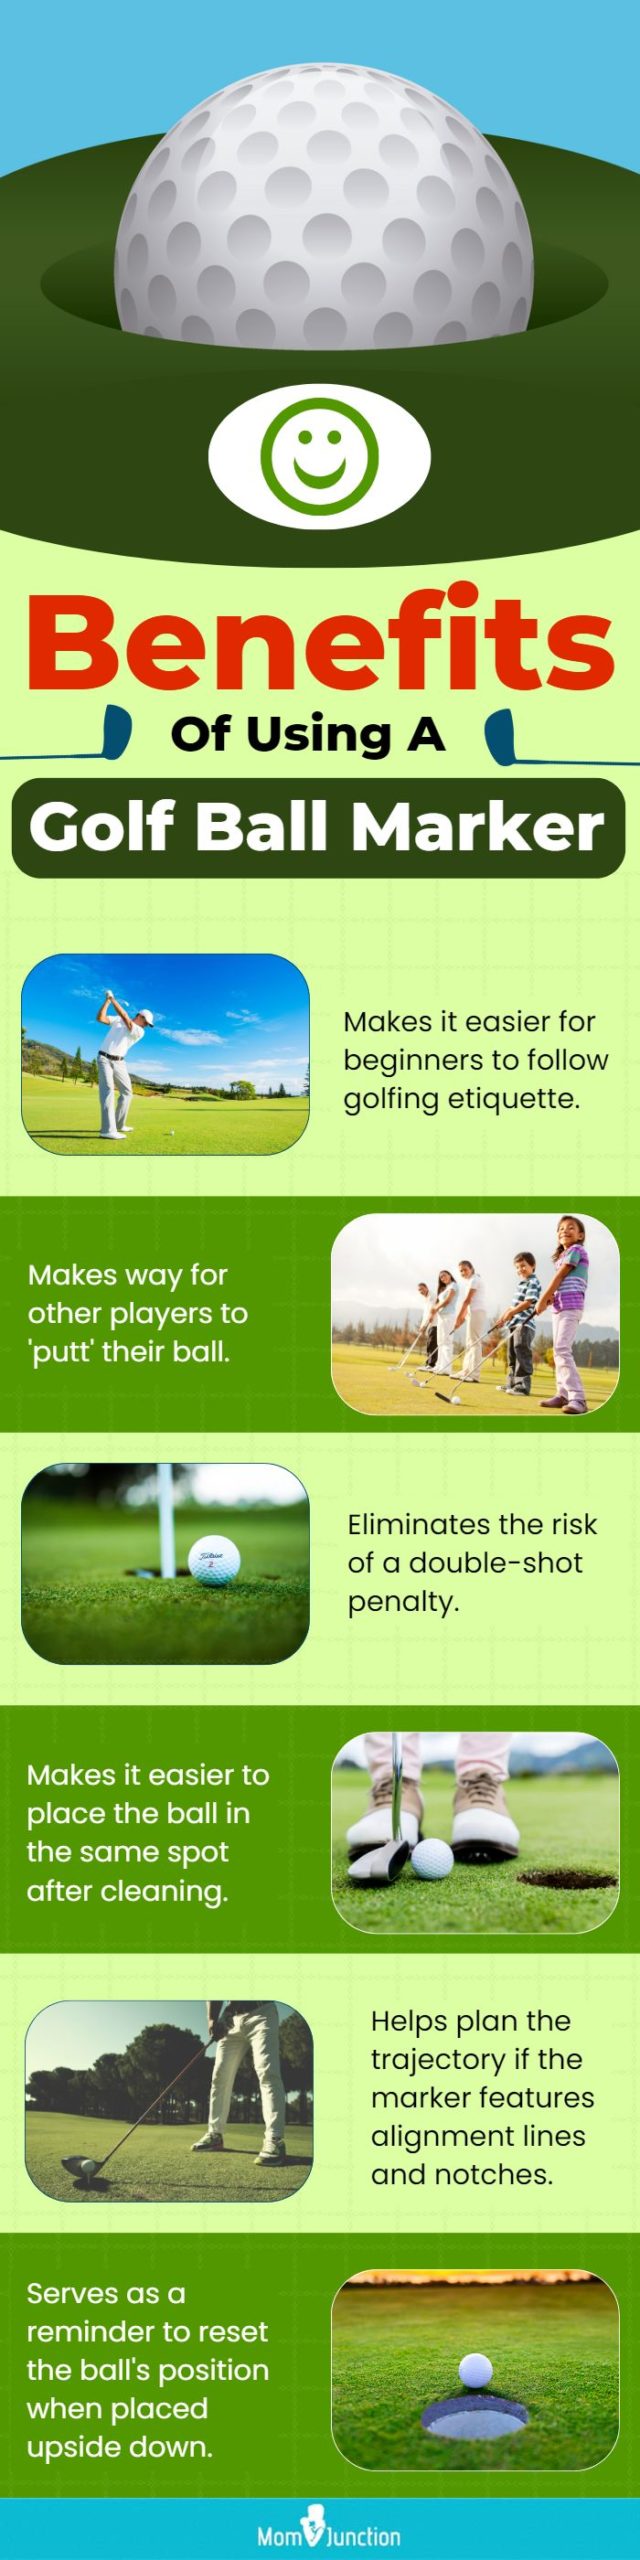 Benefits Of Using A Golf Ball Marke (infographic)